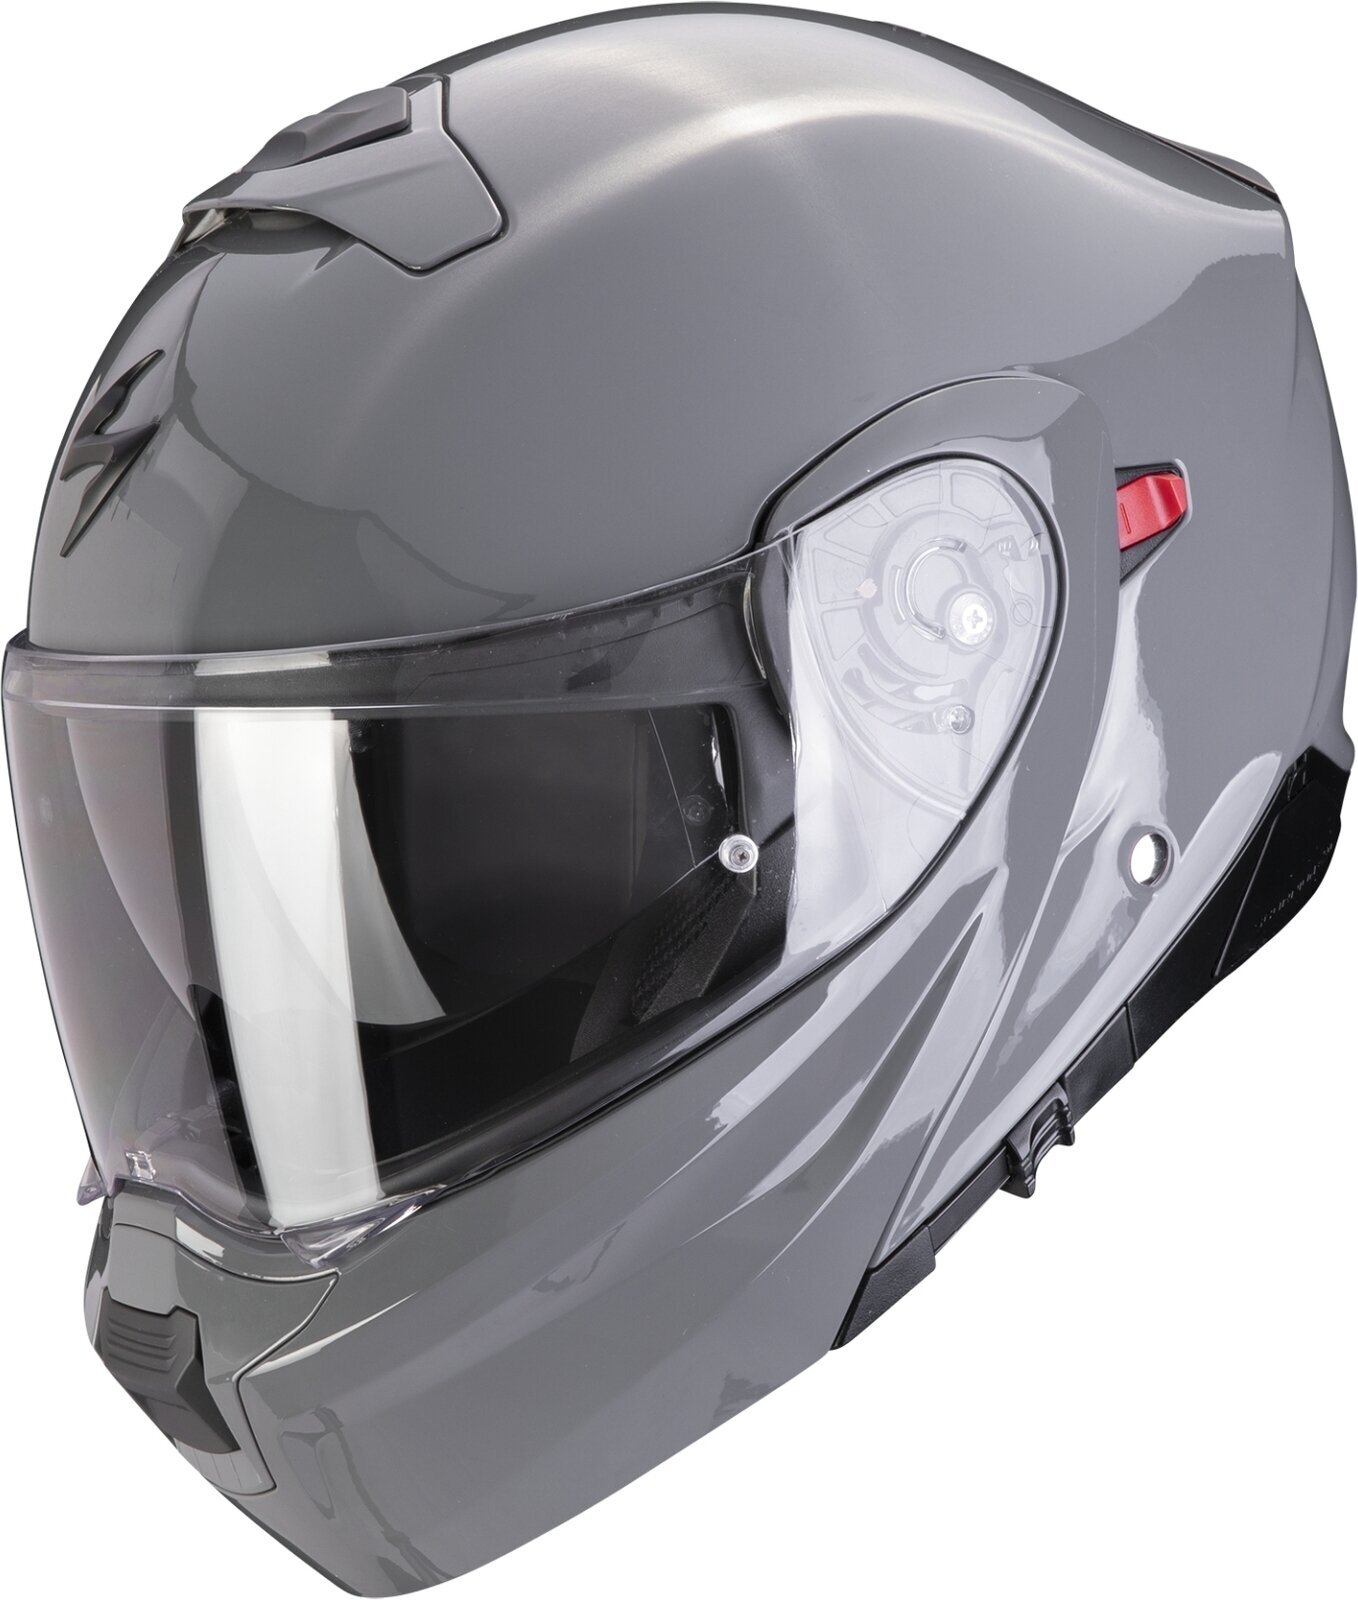 Kask Scorpion EXO 930 EVO SOLID Cement Grey M Kask